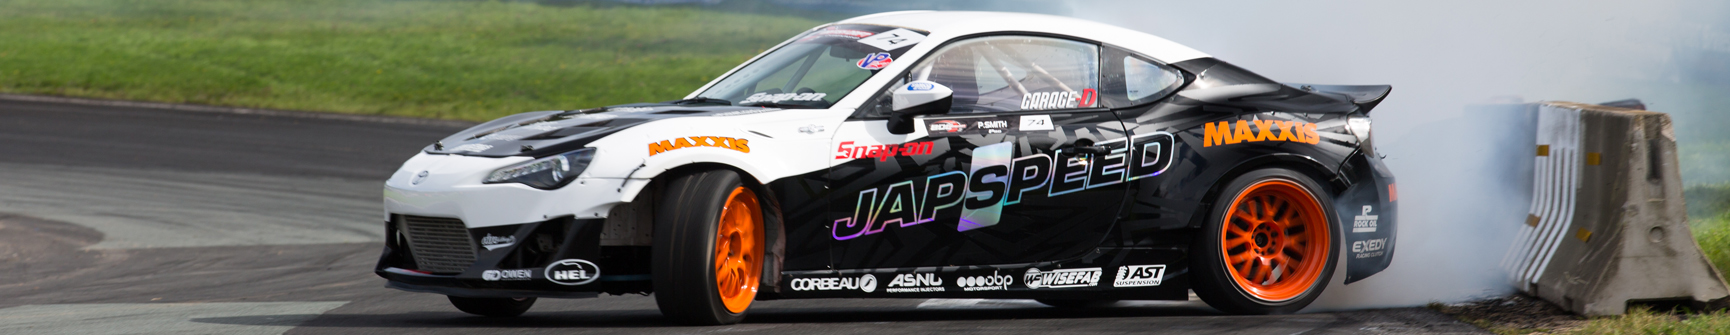 Japspeed Pulls Out All Stops for Final Fight